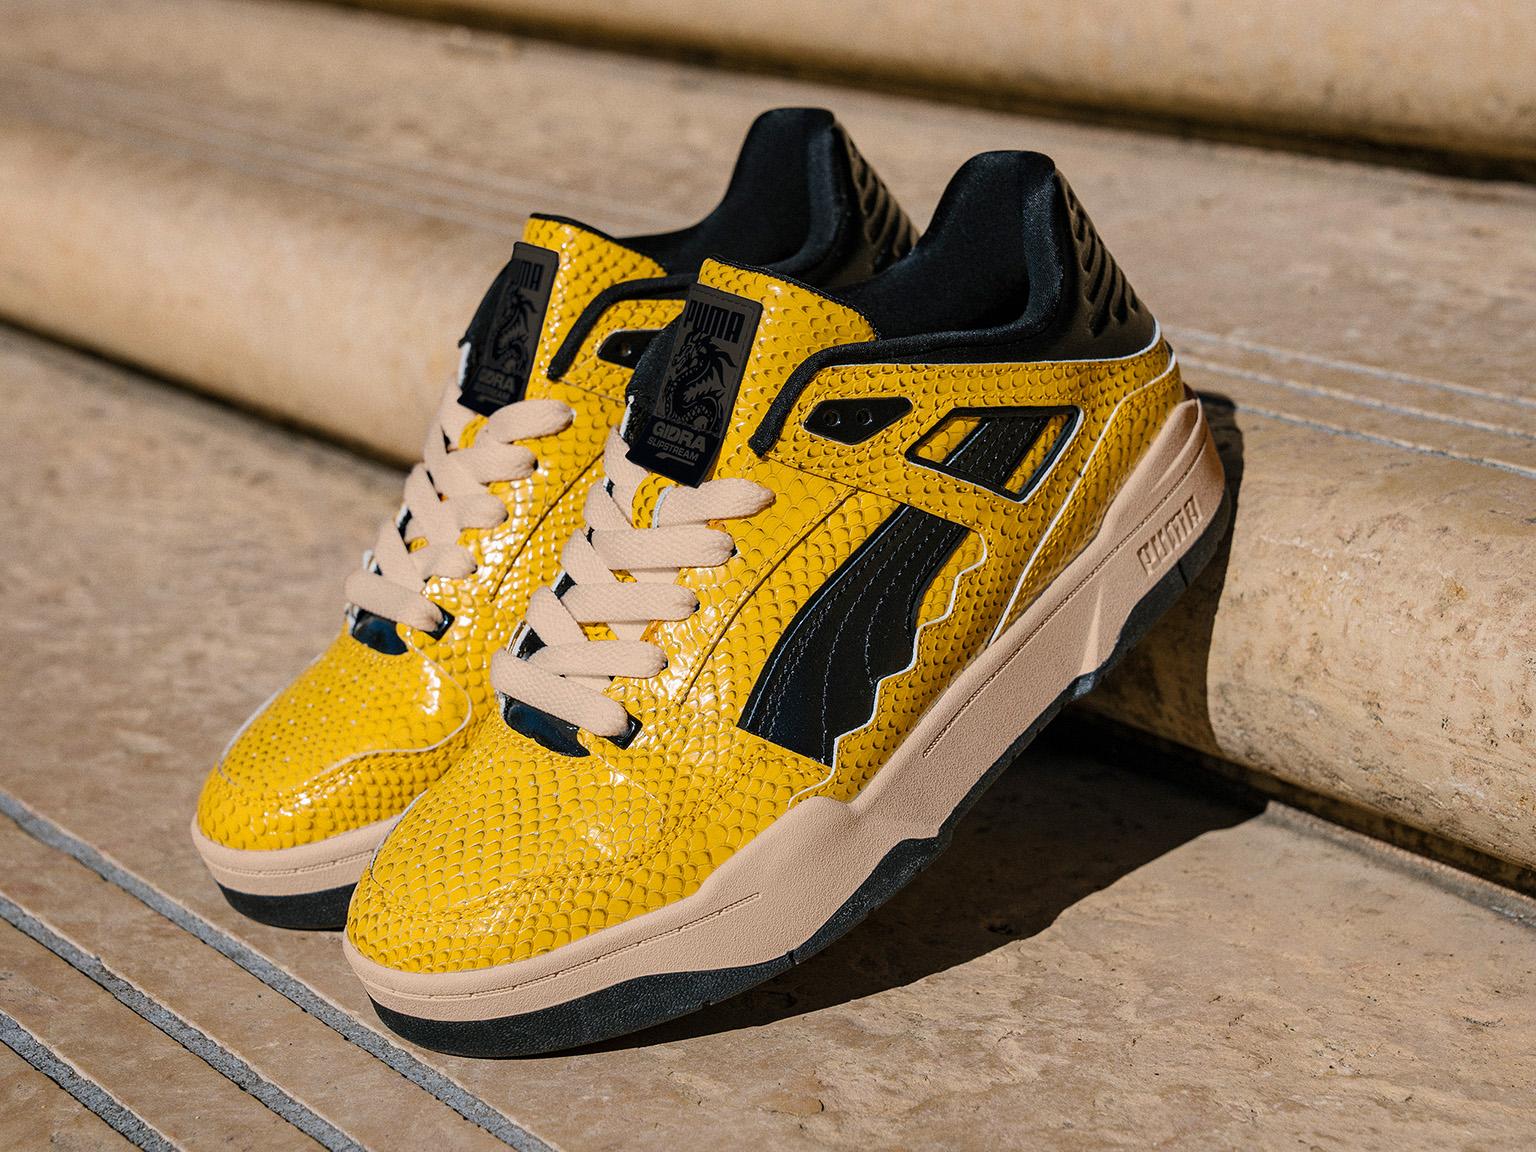 PUMA AND STAPLE'S NEW COLLABORATION IS INSPIRED BY INFLUENTIAL ...